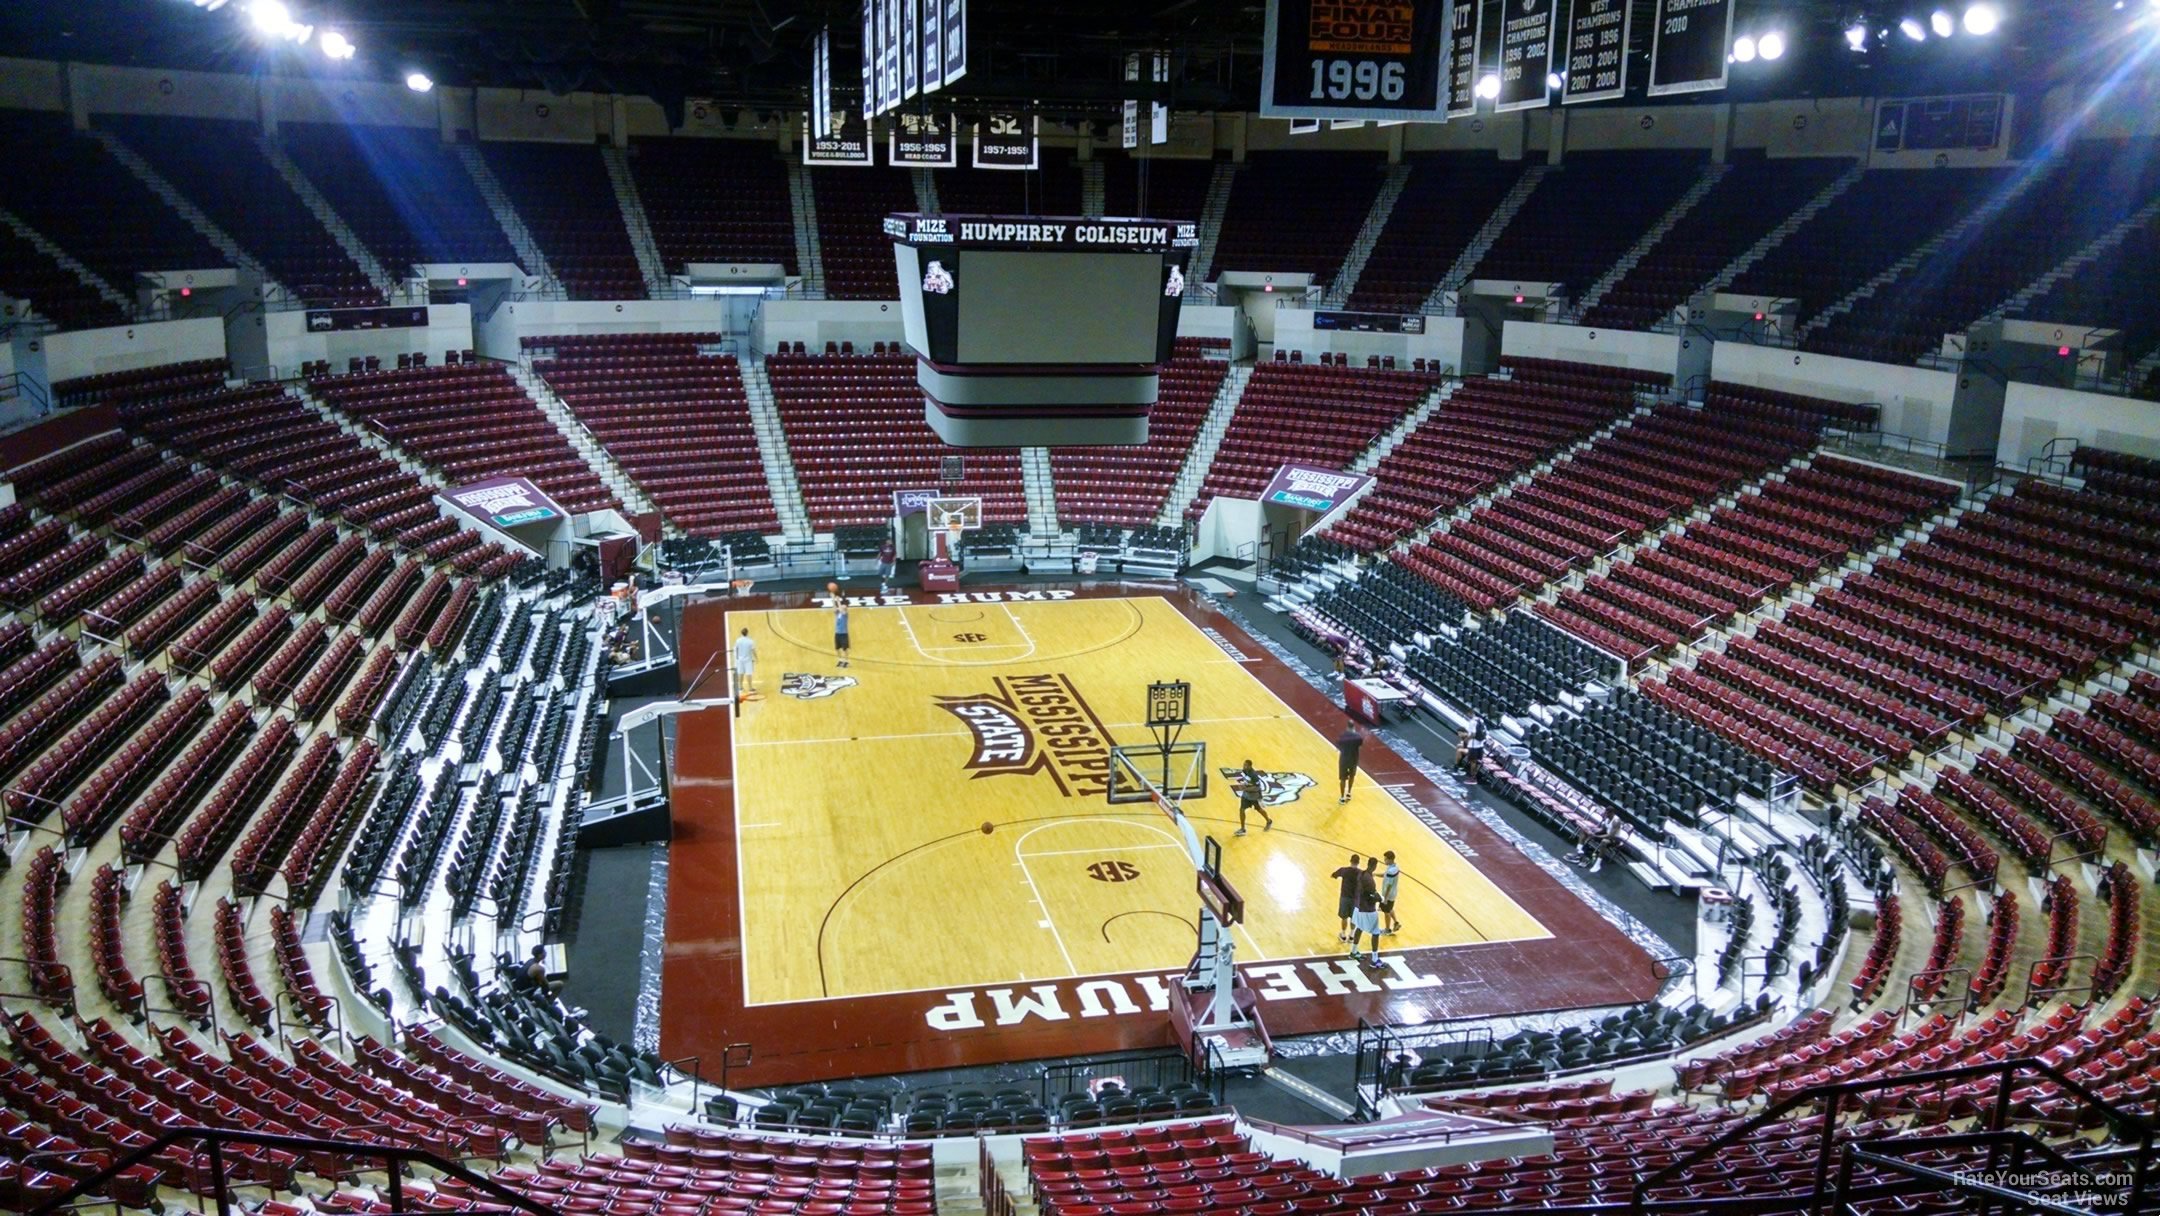 section 202, row 8 seat view  - humphrey coliseum